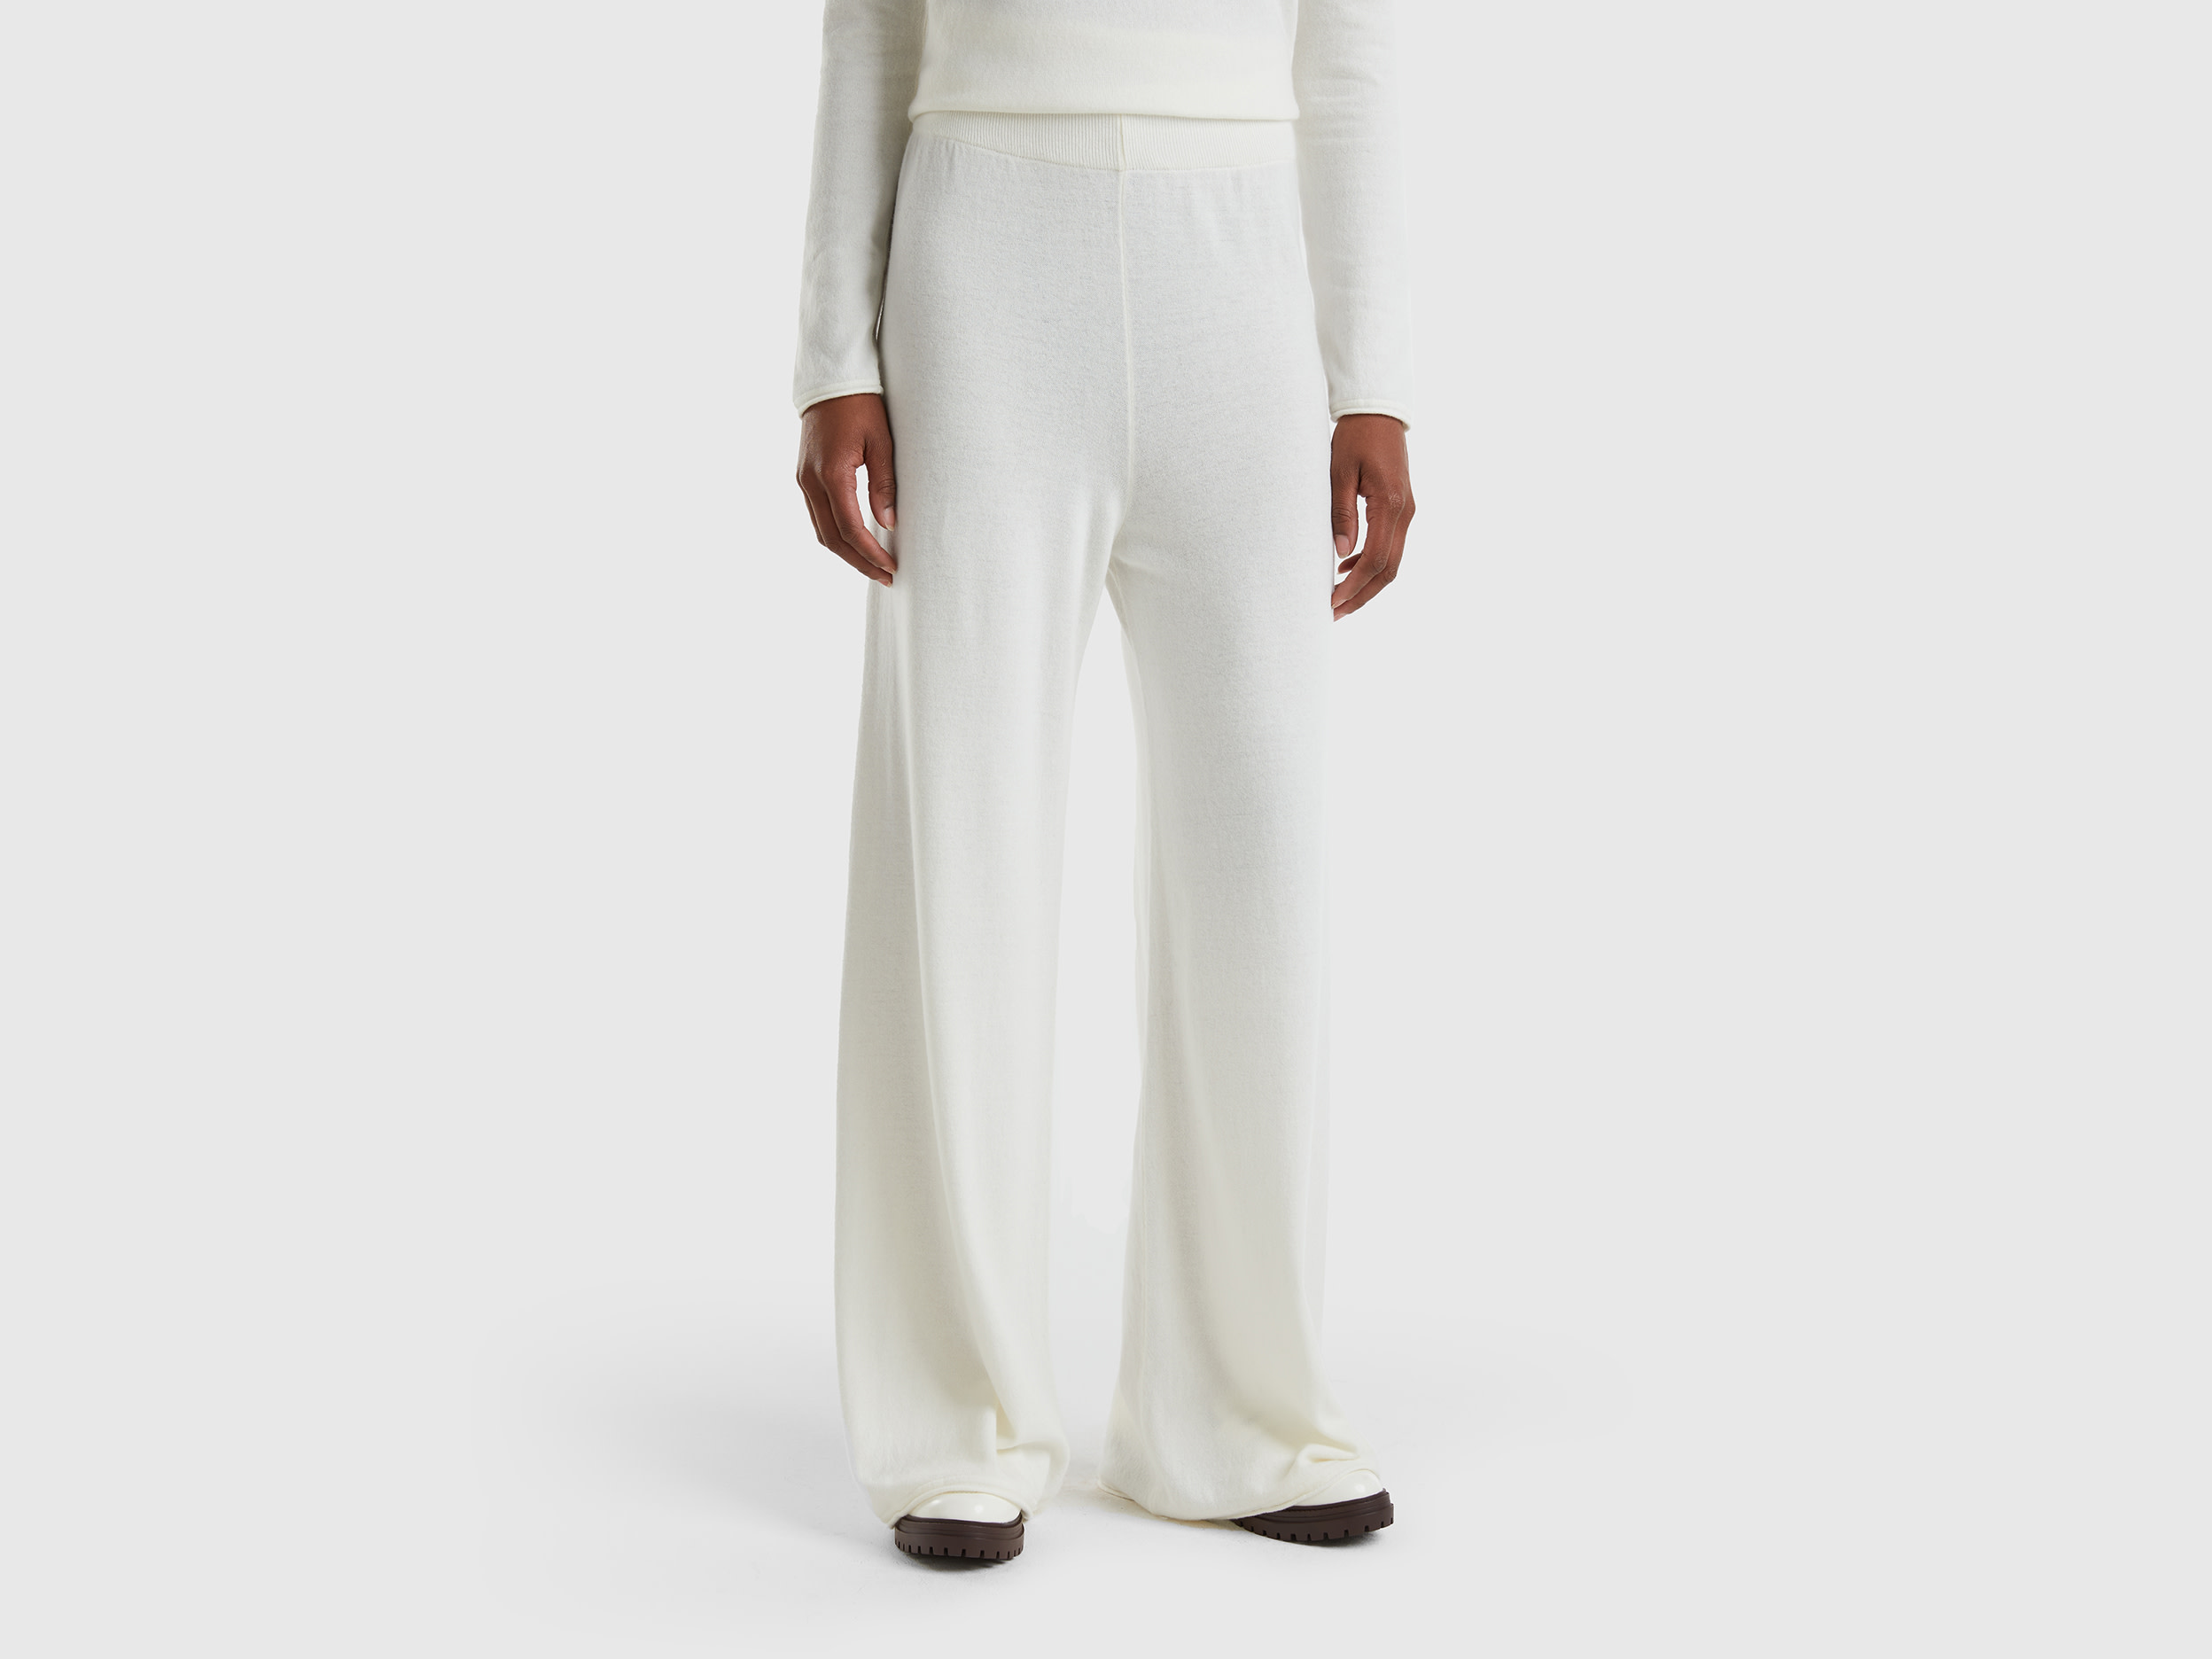 Benetton, Cream White Wide Trousers In Cashmere And Wool Blend, size XL, Creamy White, Women